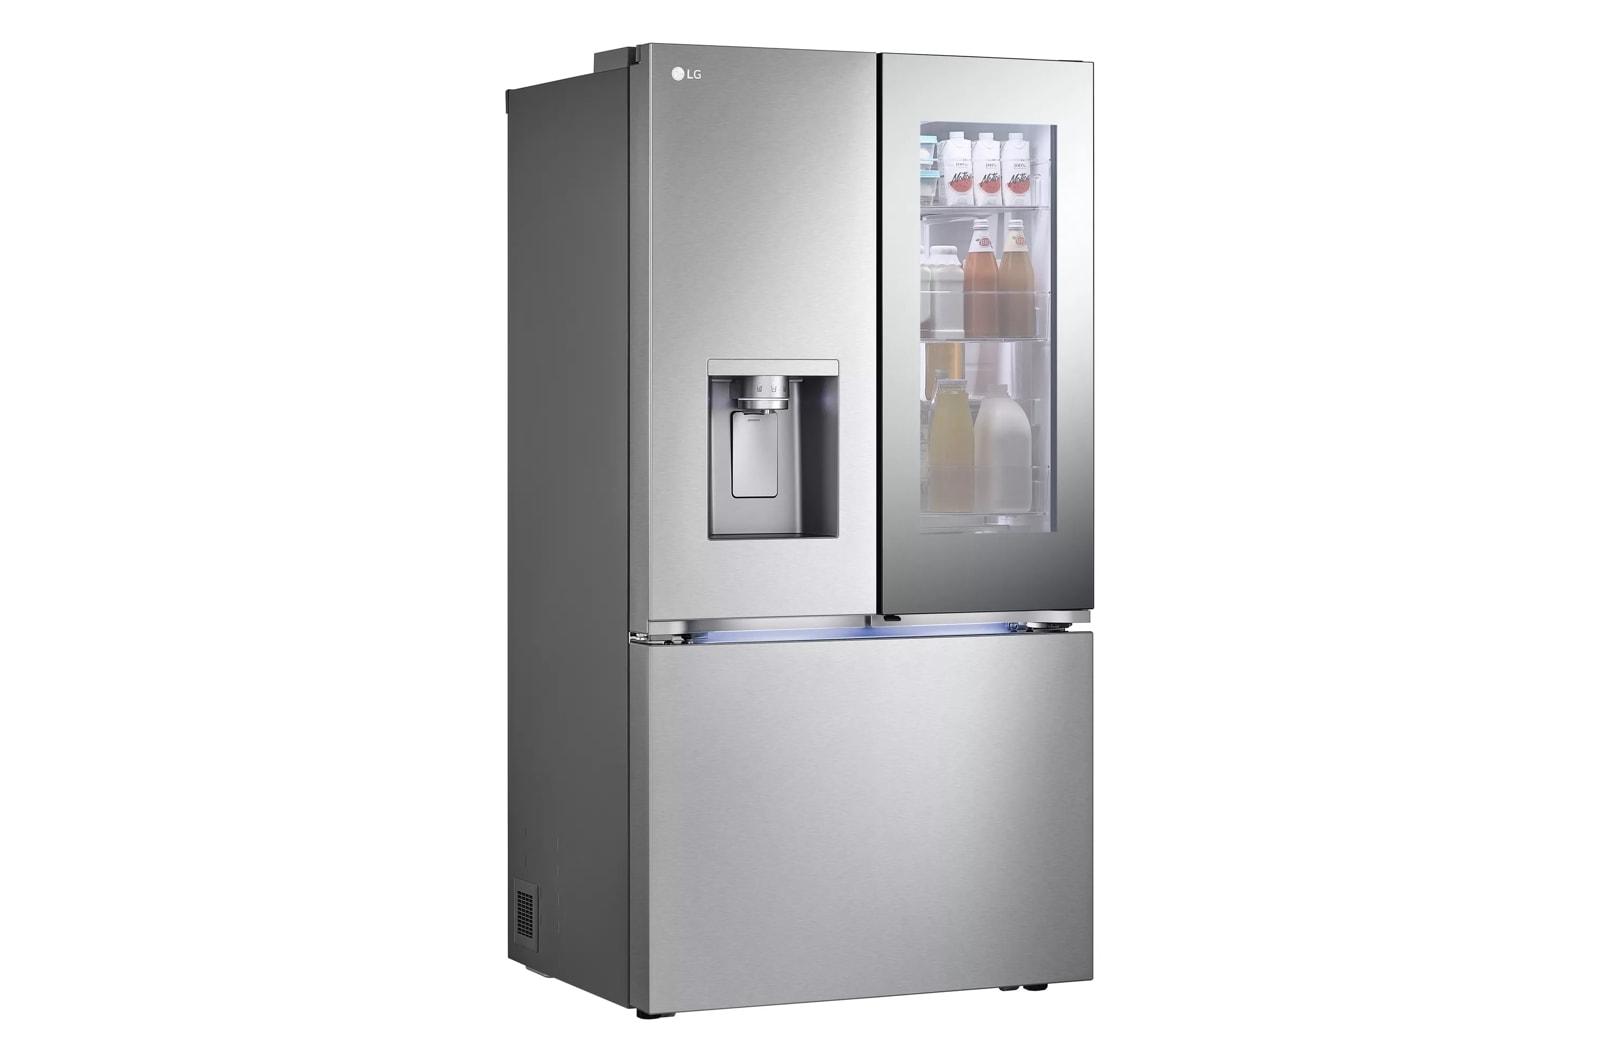 Lg 31 cu. ft. Smart Standard-Depth MAX™ French Door Refrigerator with Four Types of Ice and Mirror InstaView®